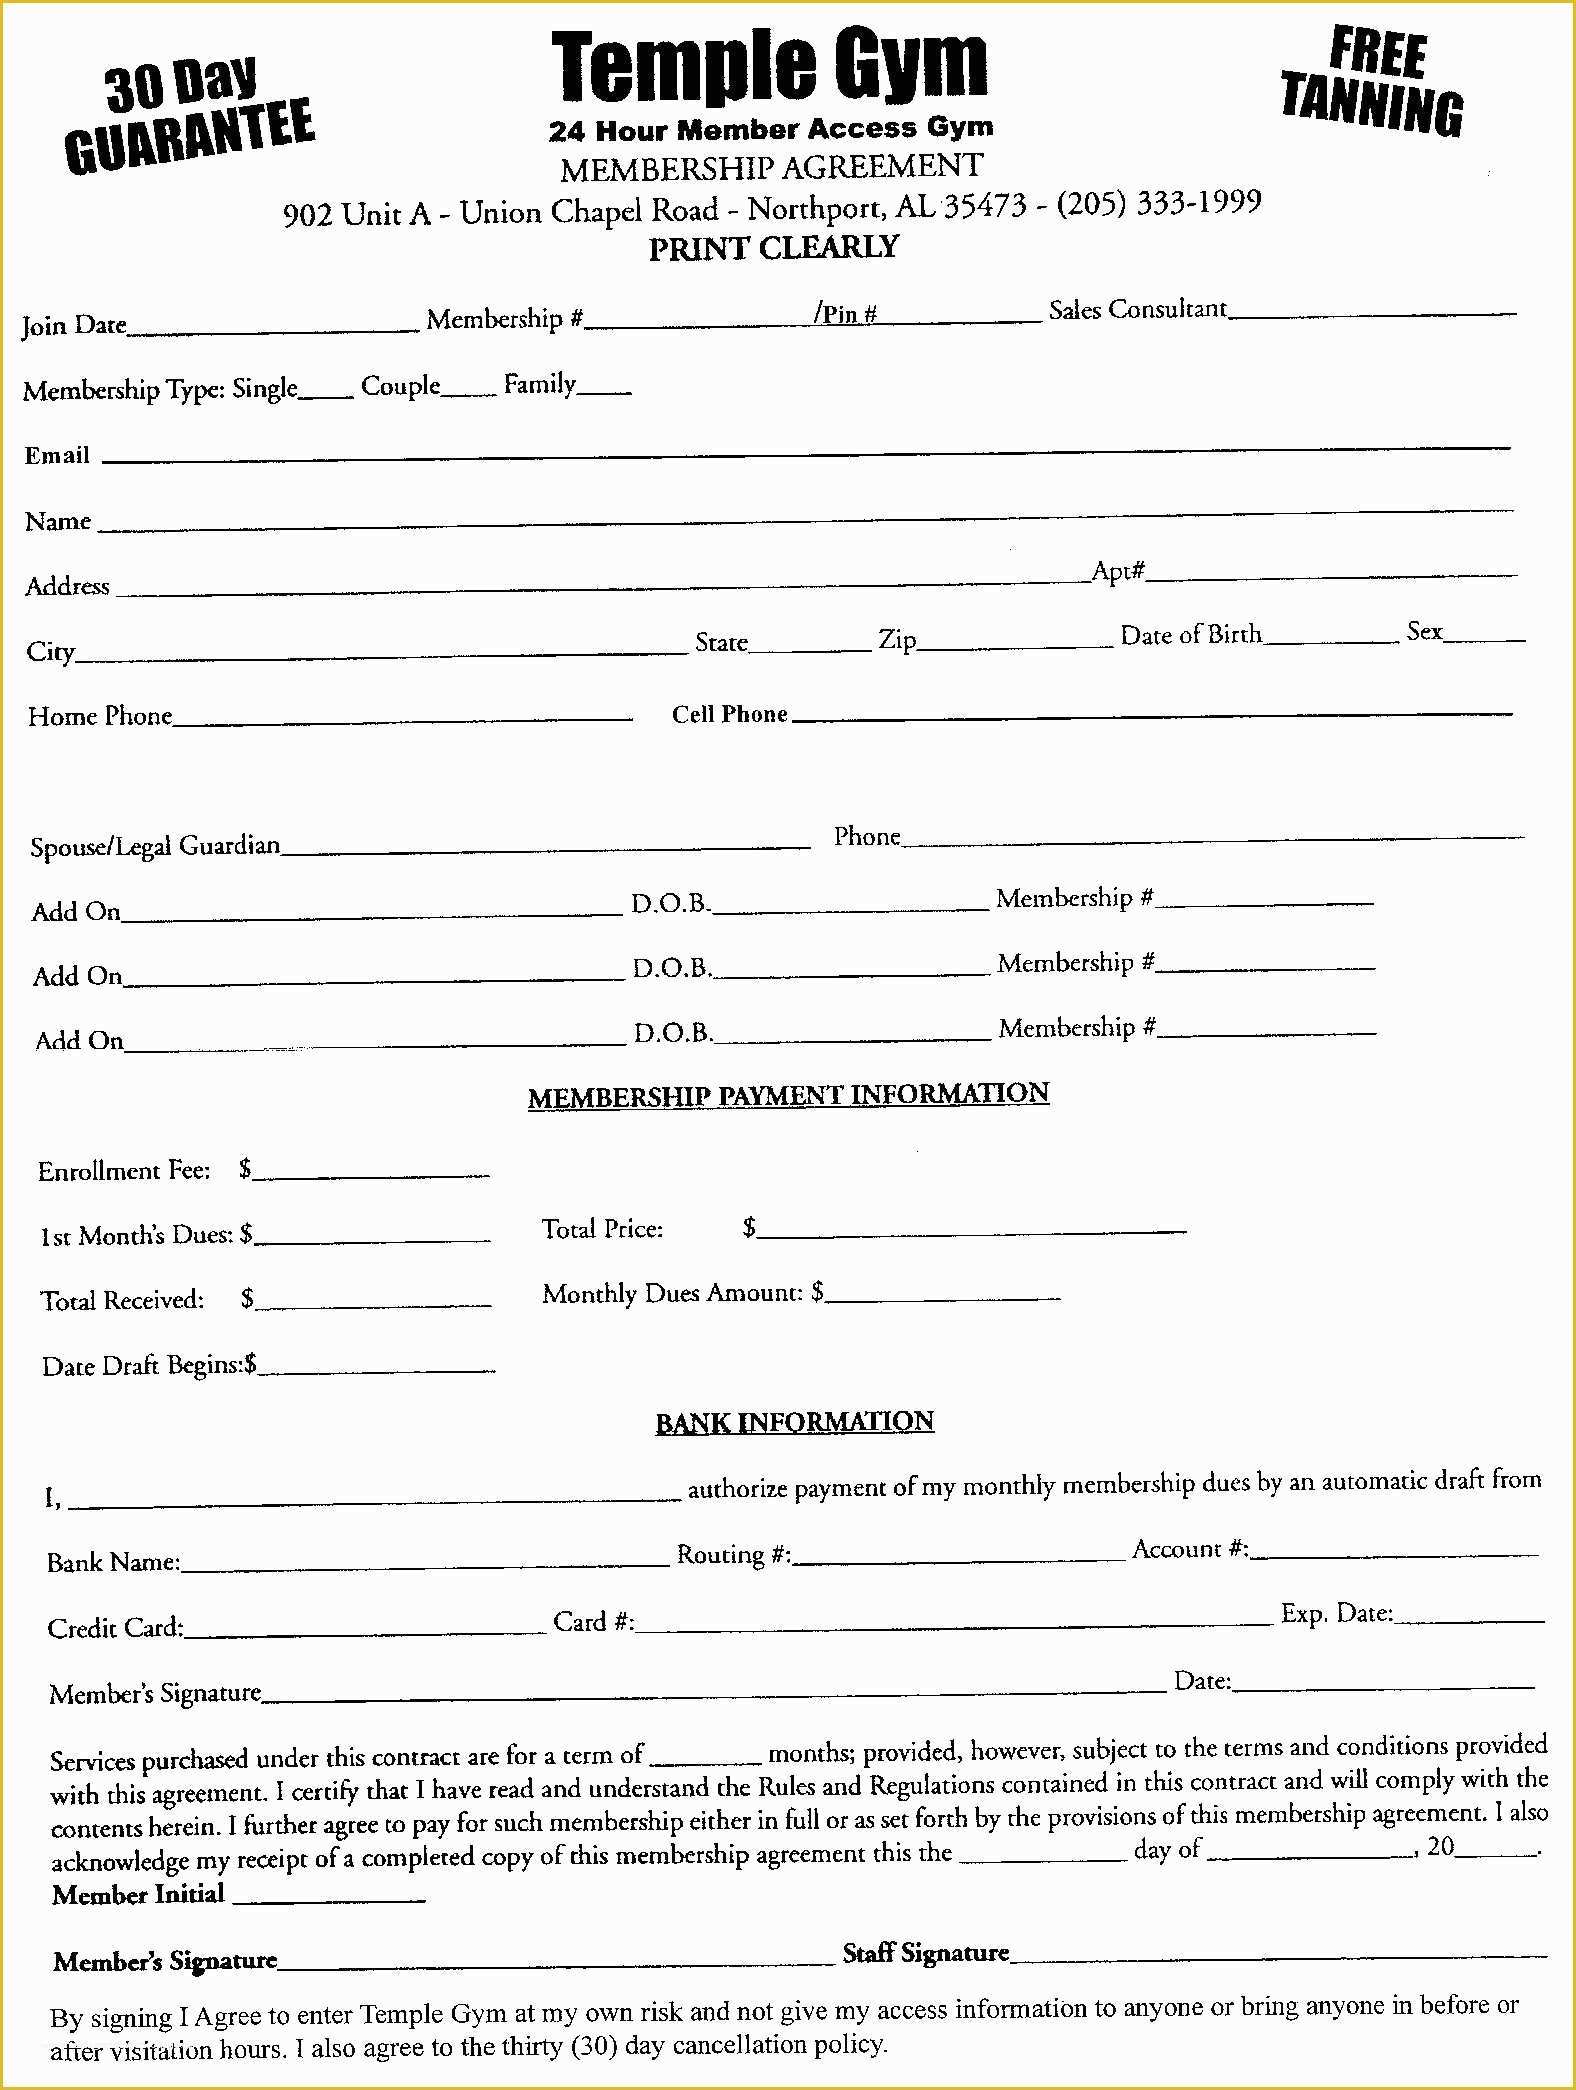 Free Fitness Waiver Template Of Free Fitness Center Legal Membership Waiver forms for Gyms